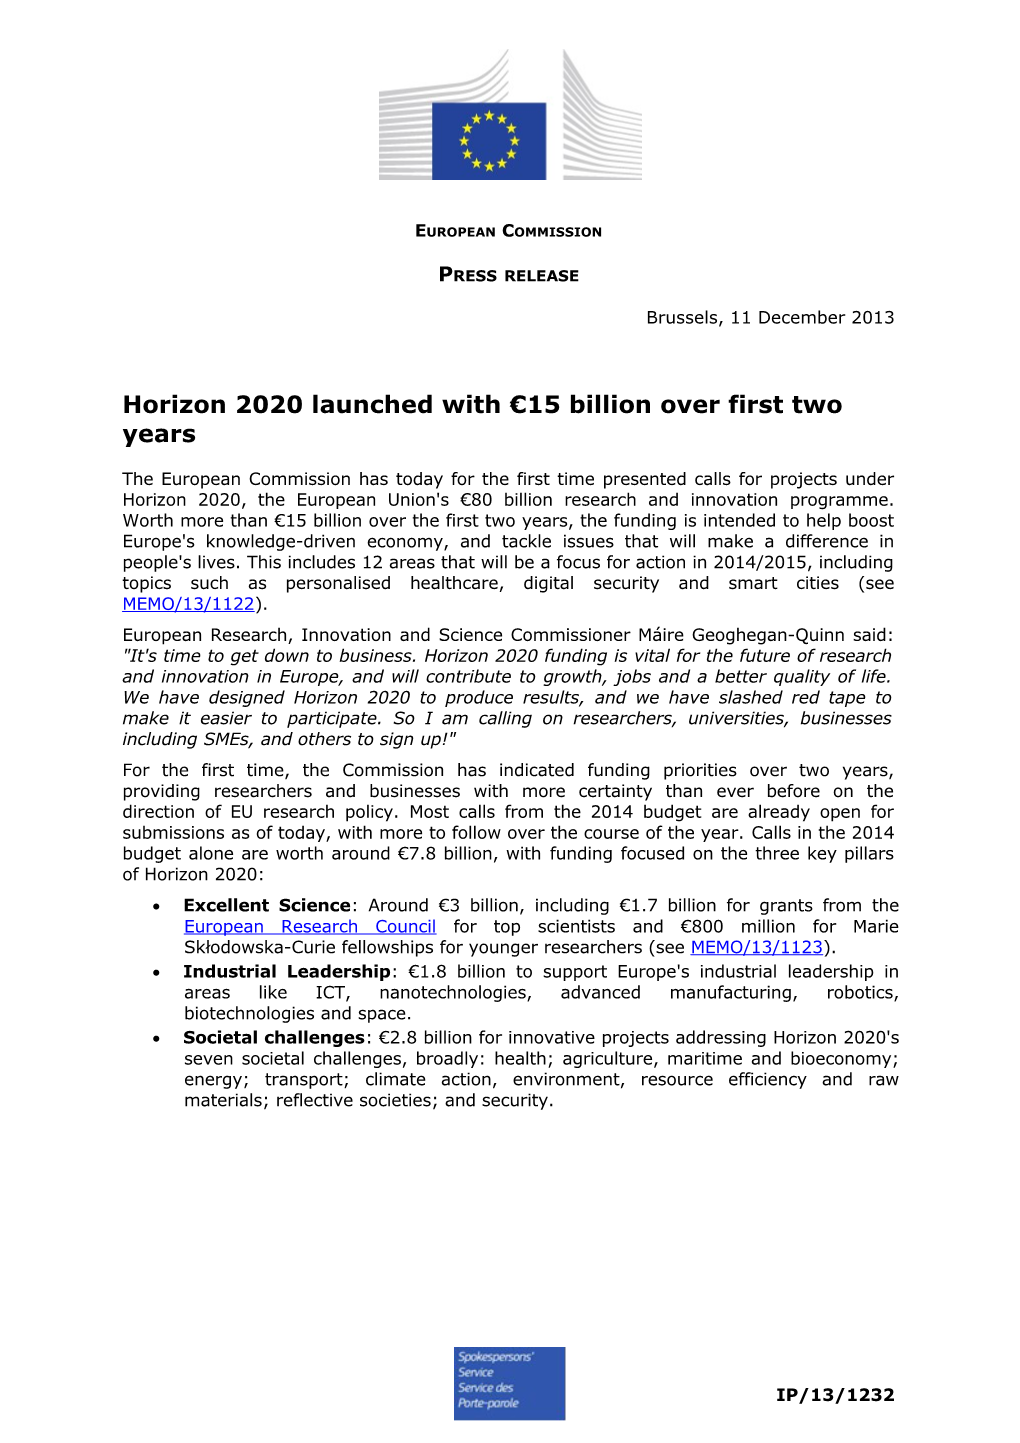 Horizon 2020 Launched with 15 Billion Over First Two Years